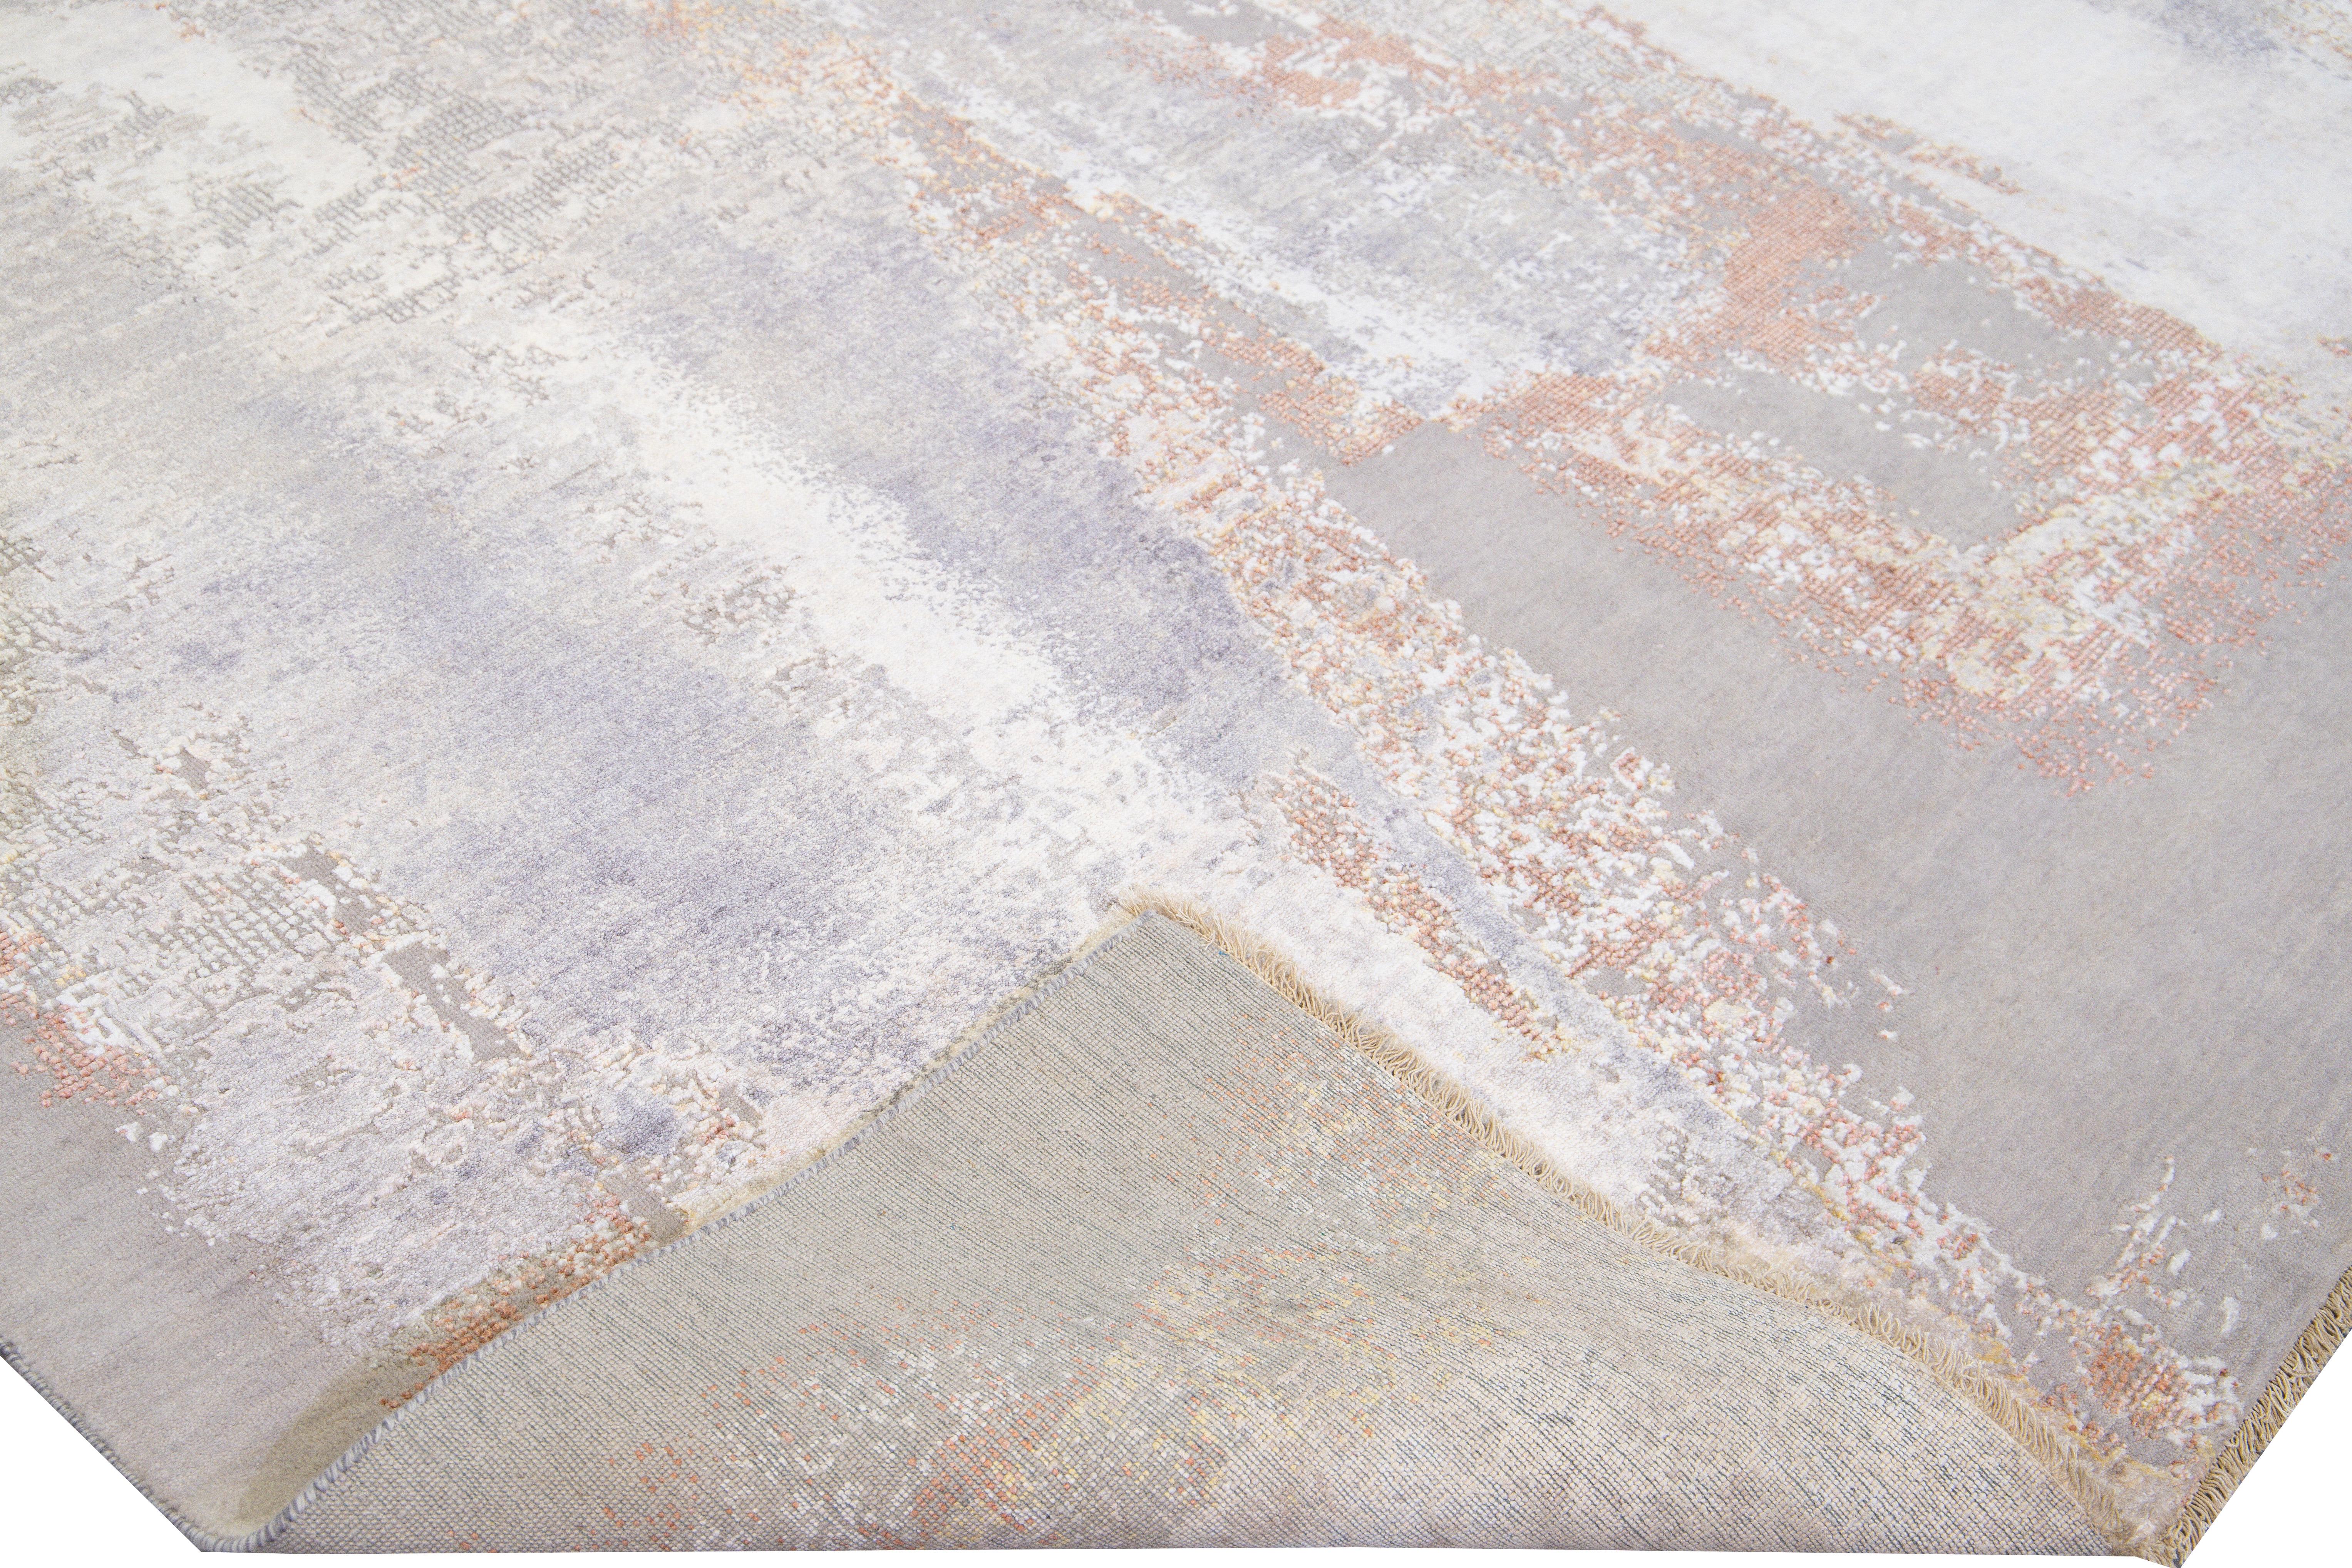 Beautiful modern Indian hand-knotted wool and silk rug with a gray and beige gradient field. This Modern rug has copper and ivory accents a gorgeous layout expressionism abstract design.

This rug measures: 9'1